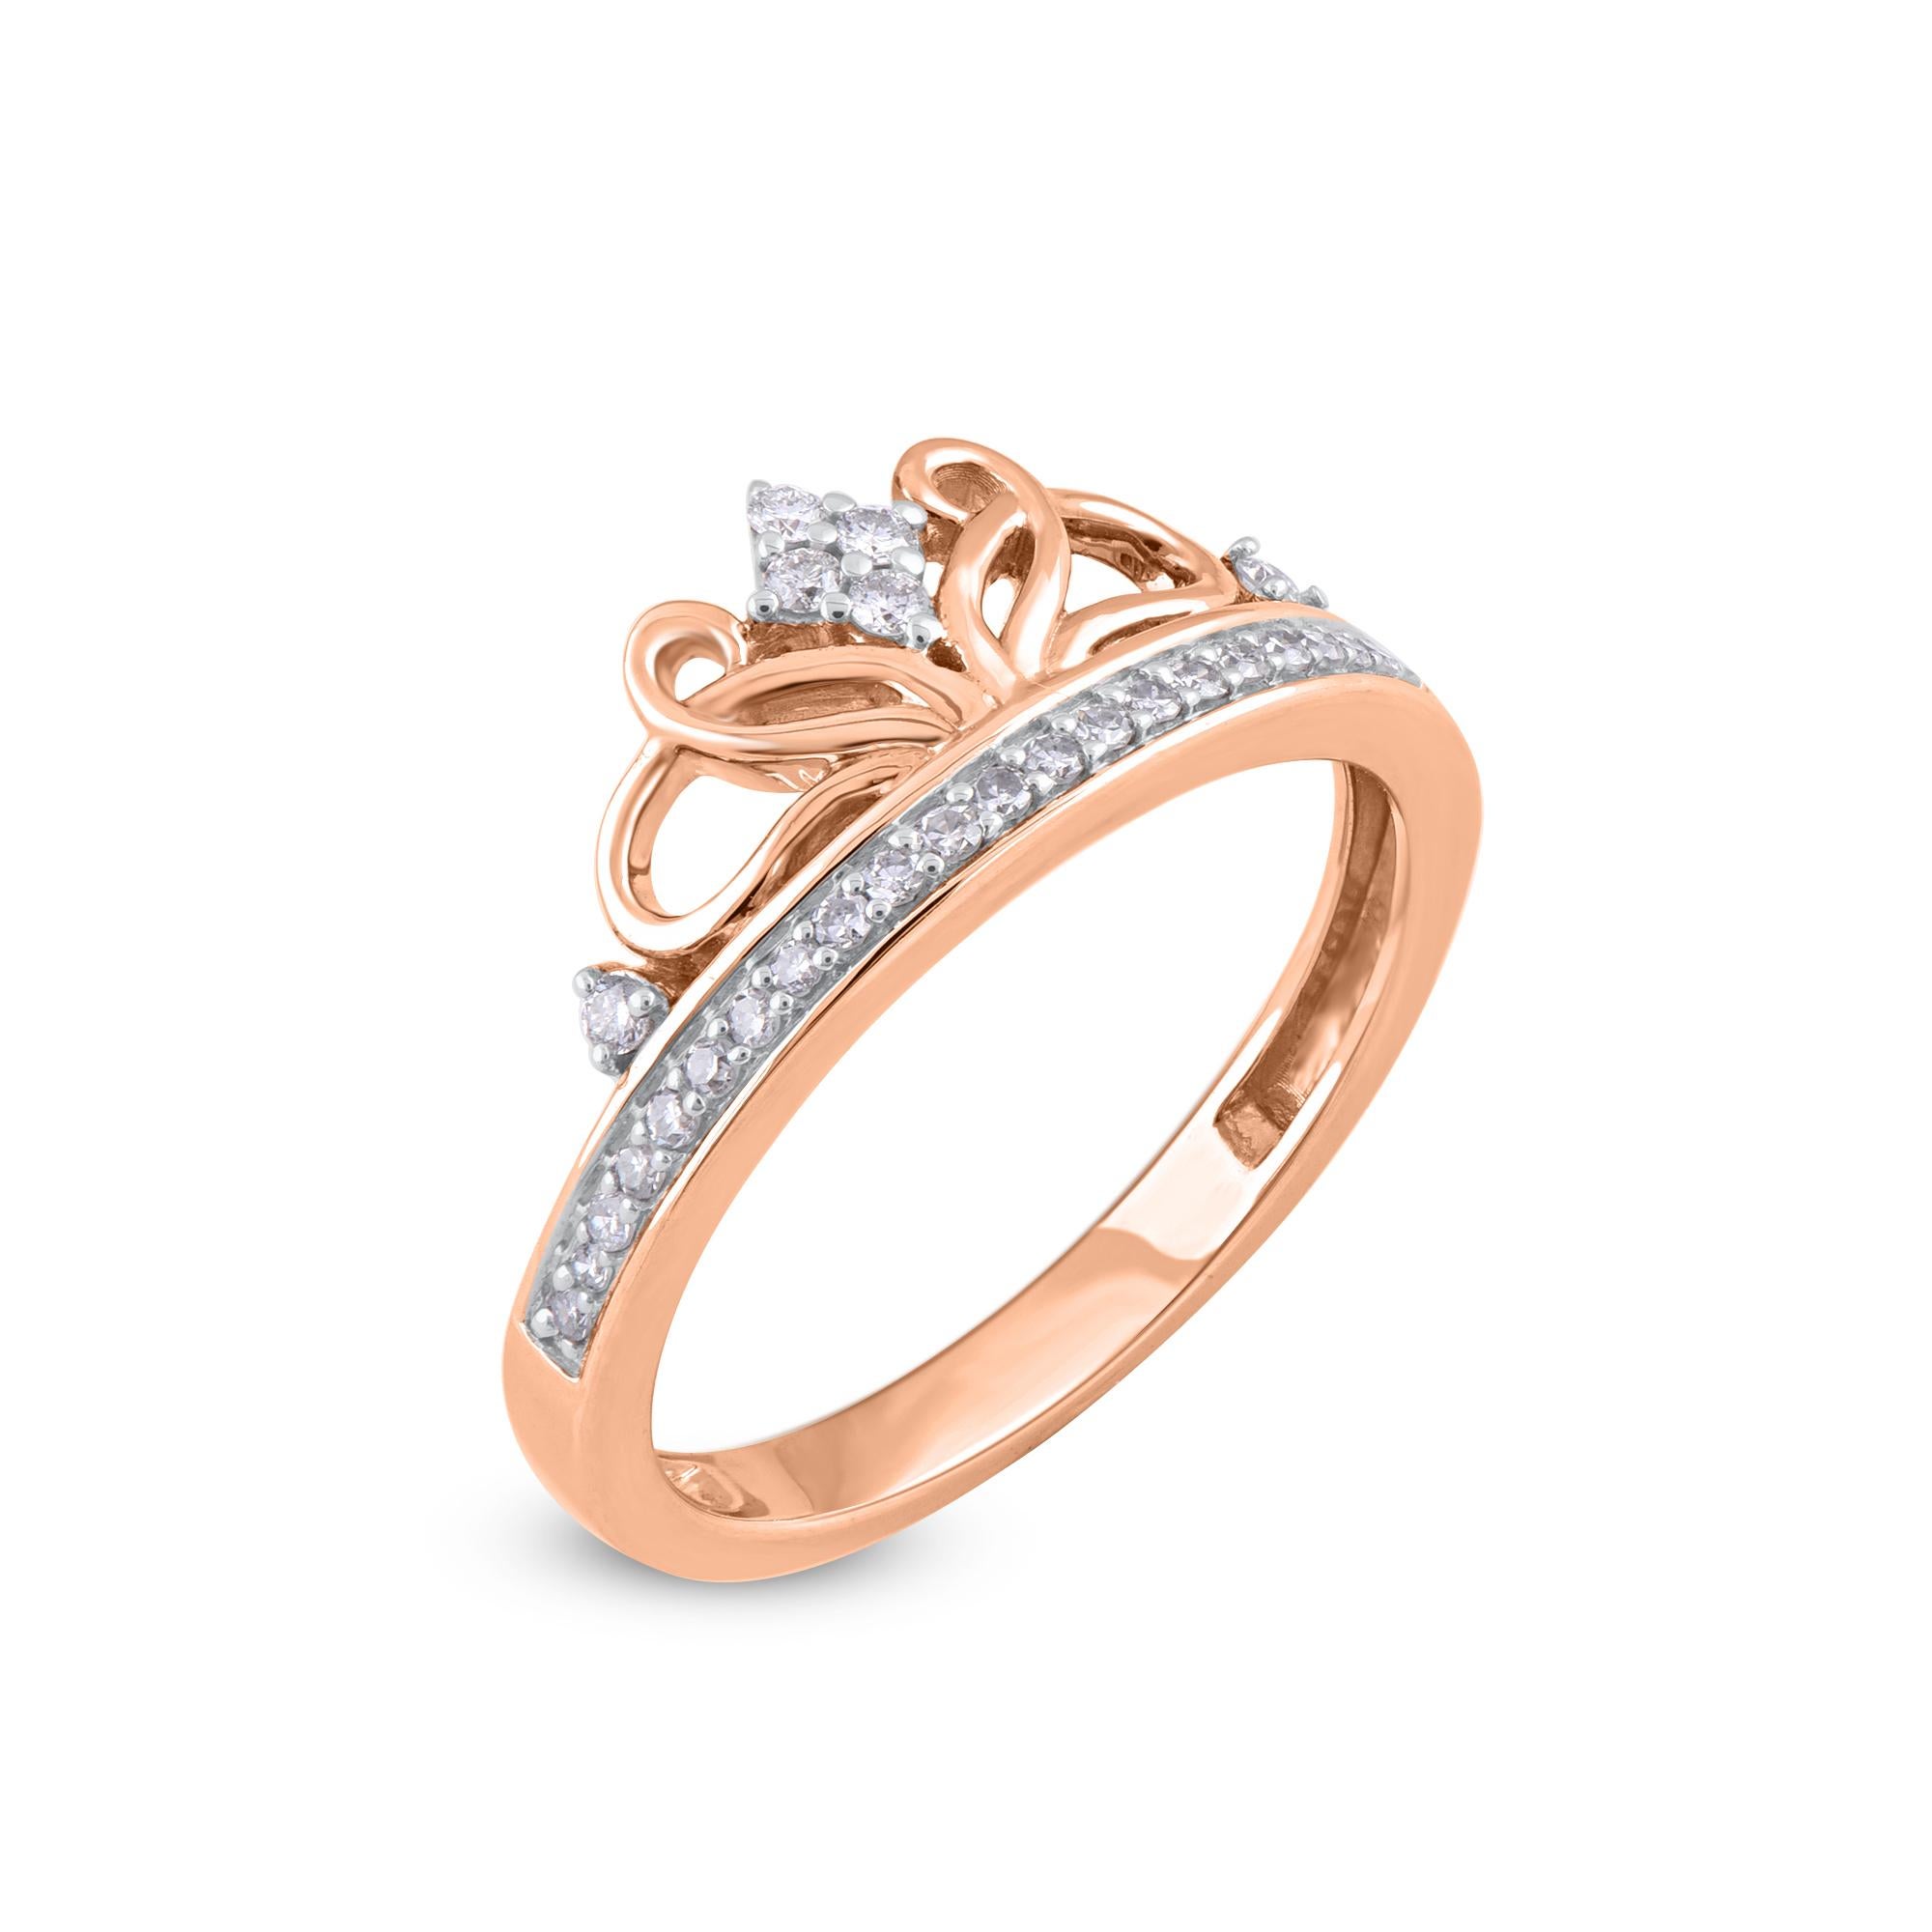 This Princess Tiara Ring is expertly crafted in 14 Karat rose gold and features 31 single cut and brilliant cut round diamonds set in prong & pave setting. The diamonds are graded as H-I color and I2 clarity. This princess tiara ring has high polish